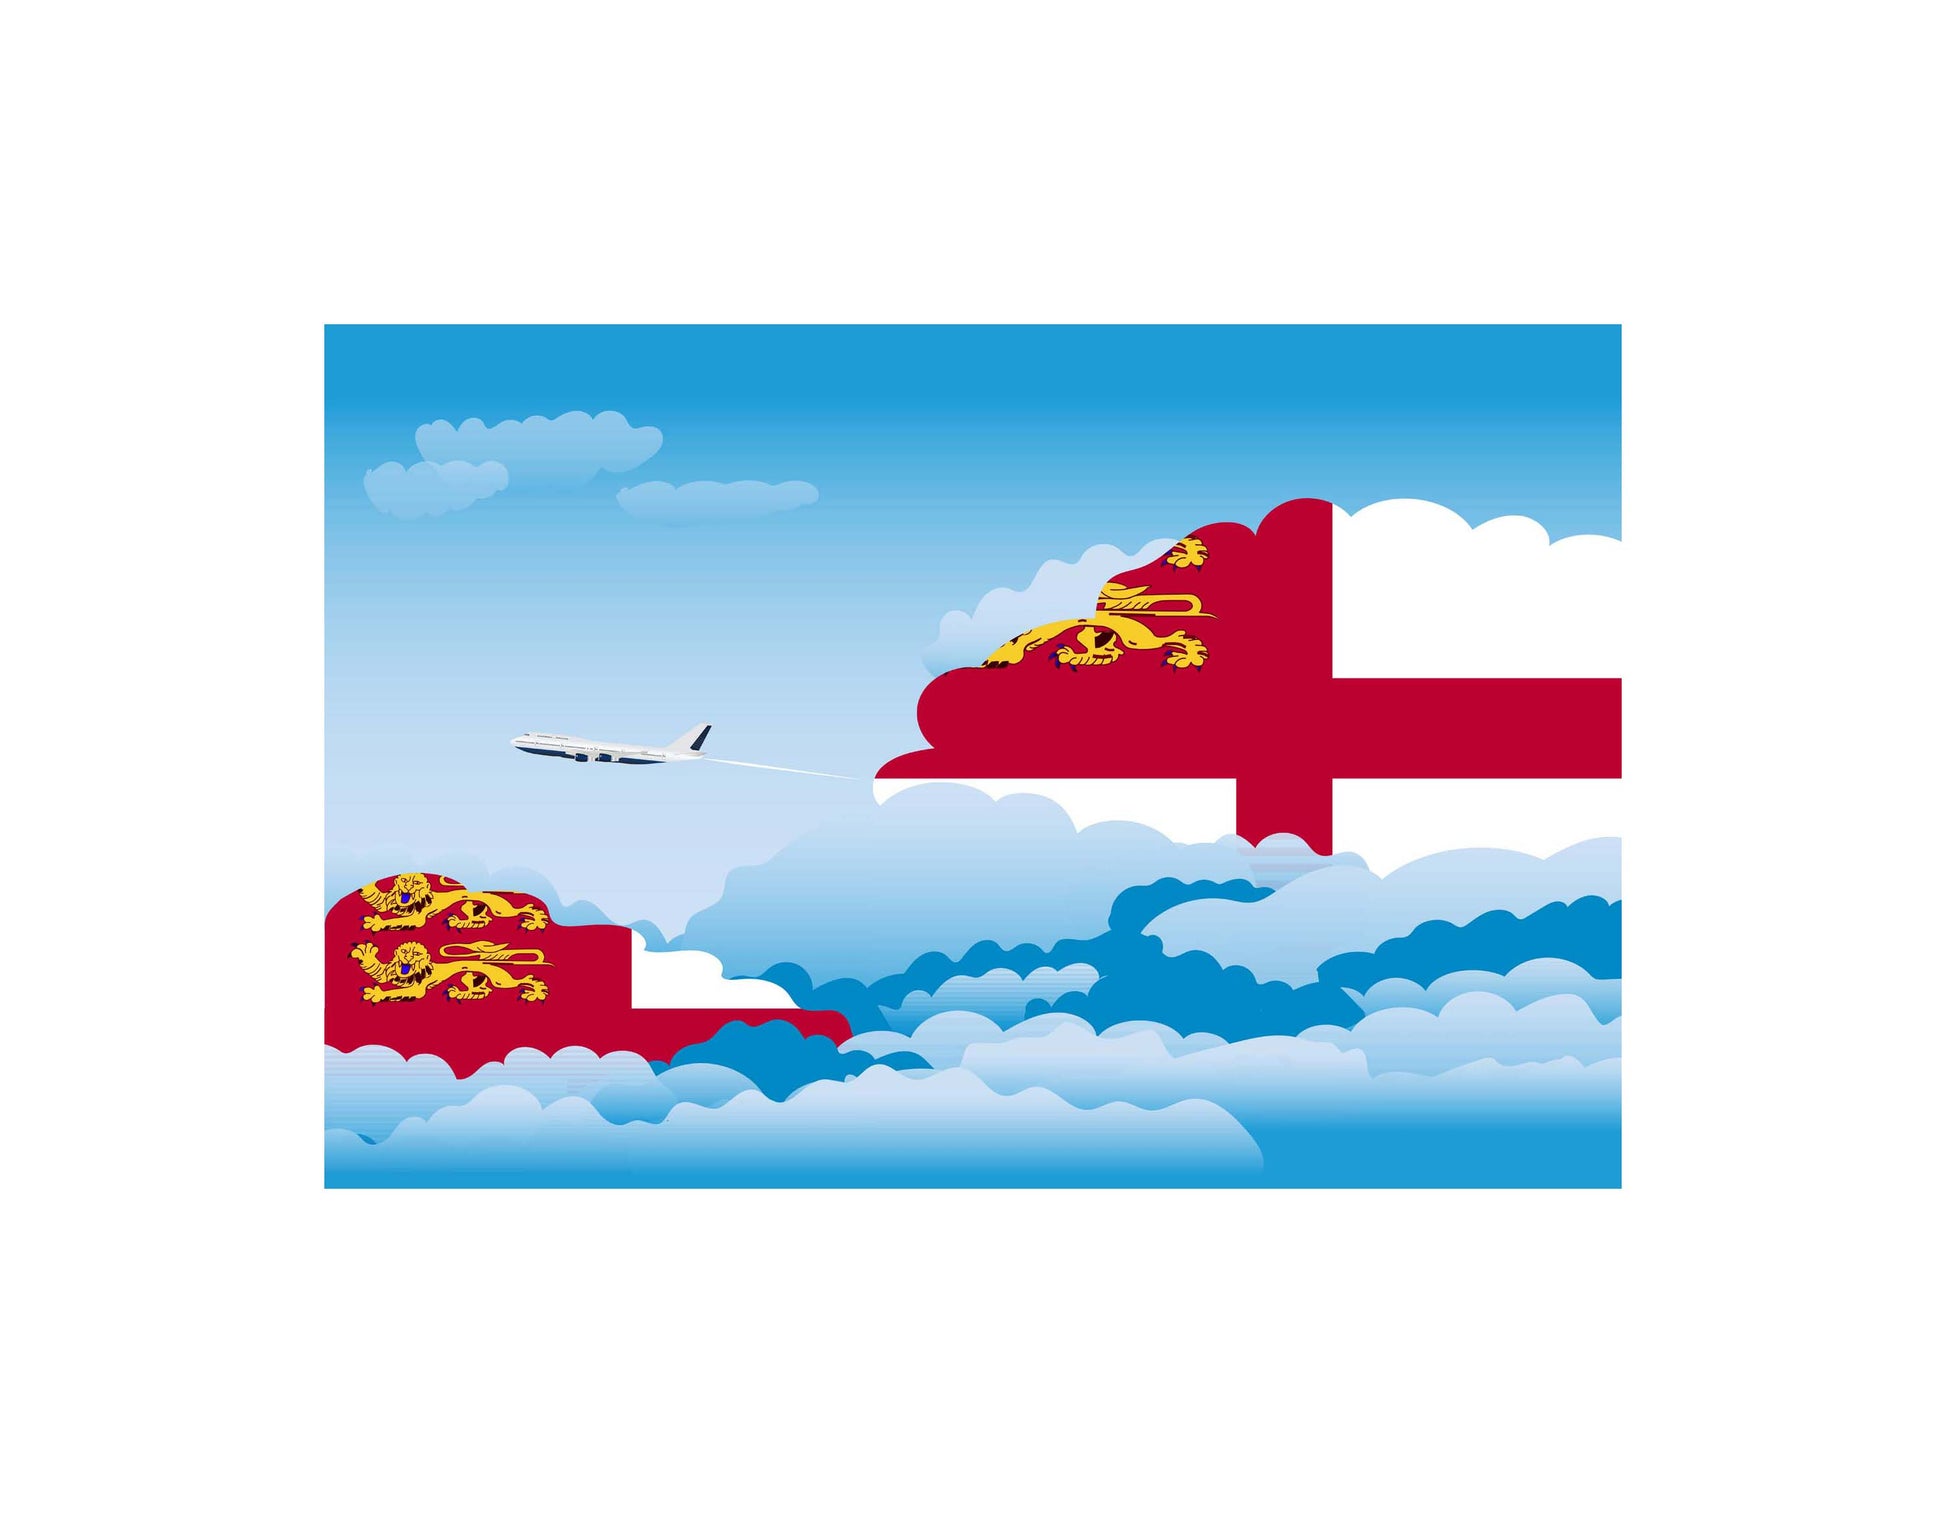 Sark Flag Day Clouds Aeroplane Airport Flying Vector Illustration